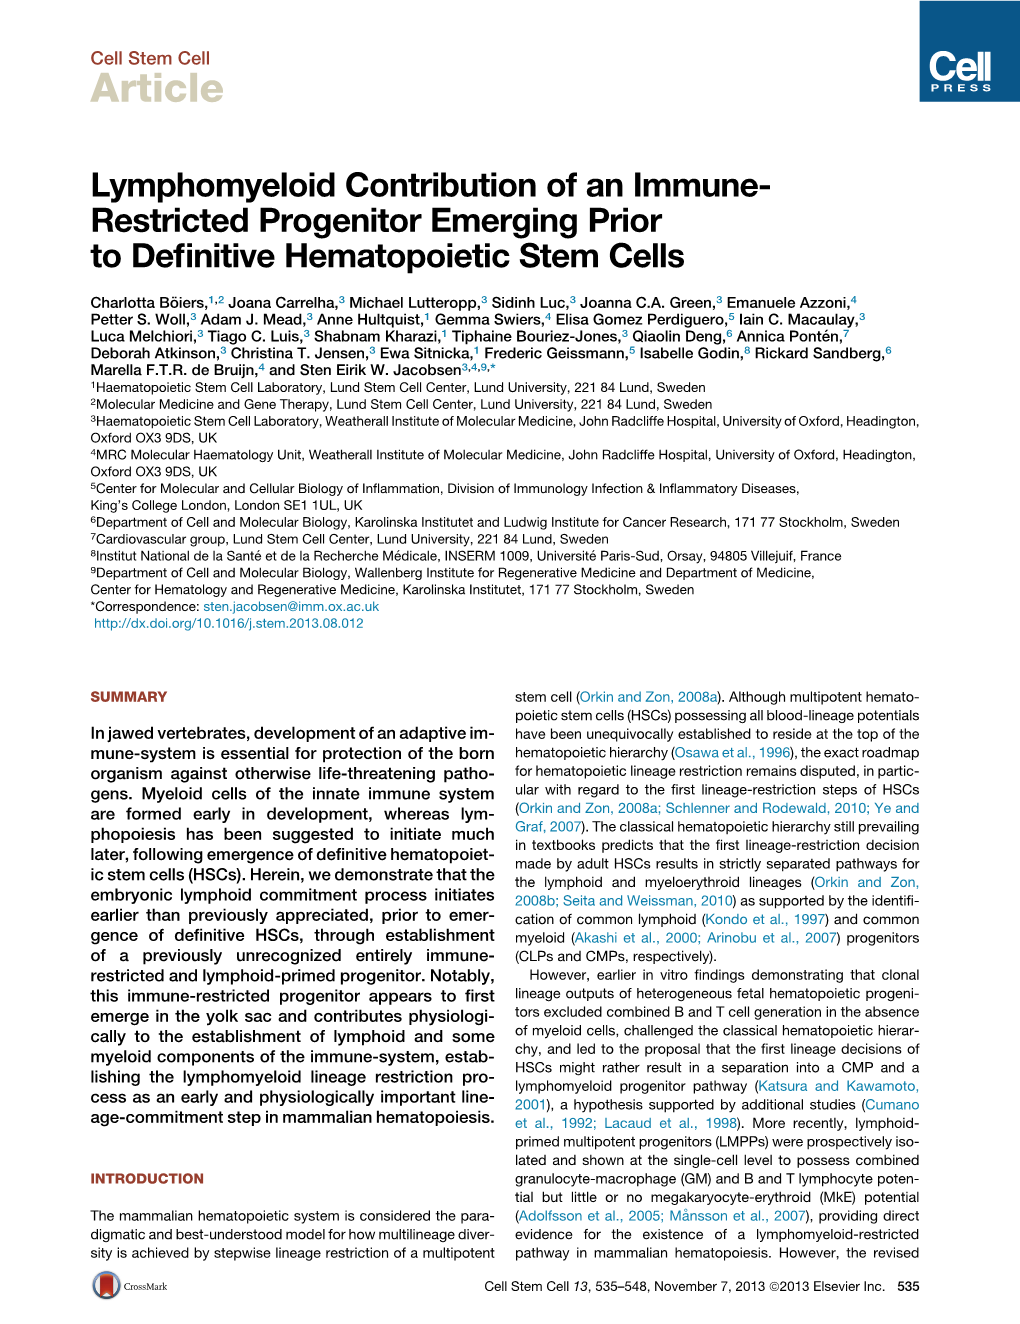 Lymphomyeloid Contribution of an Immune-Restricted Progenitor